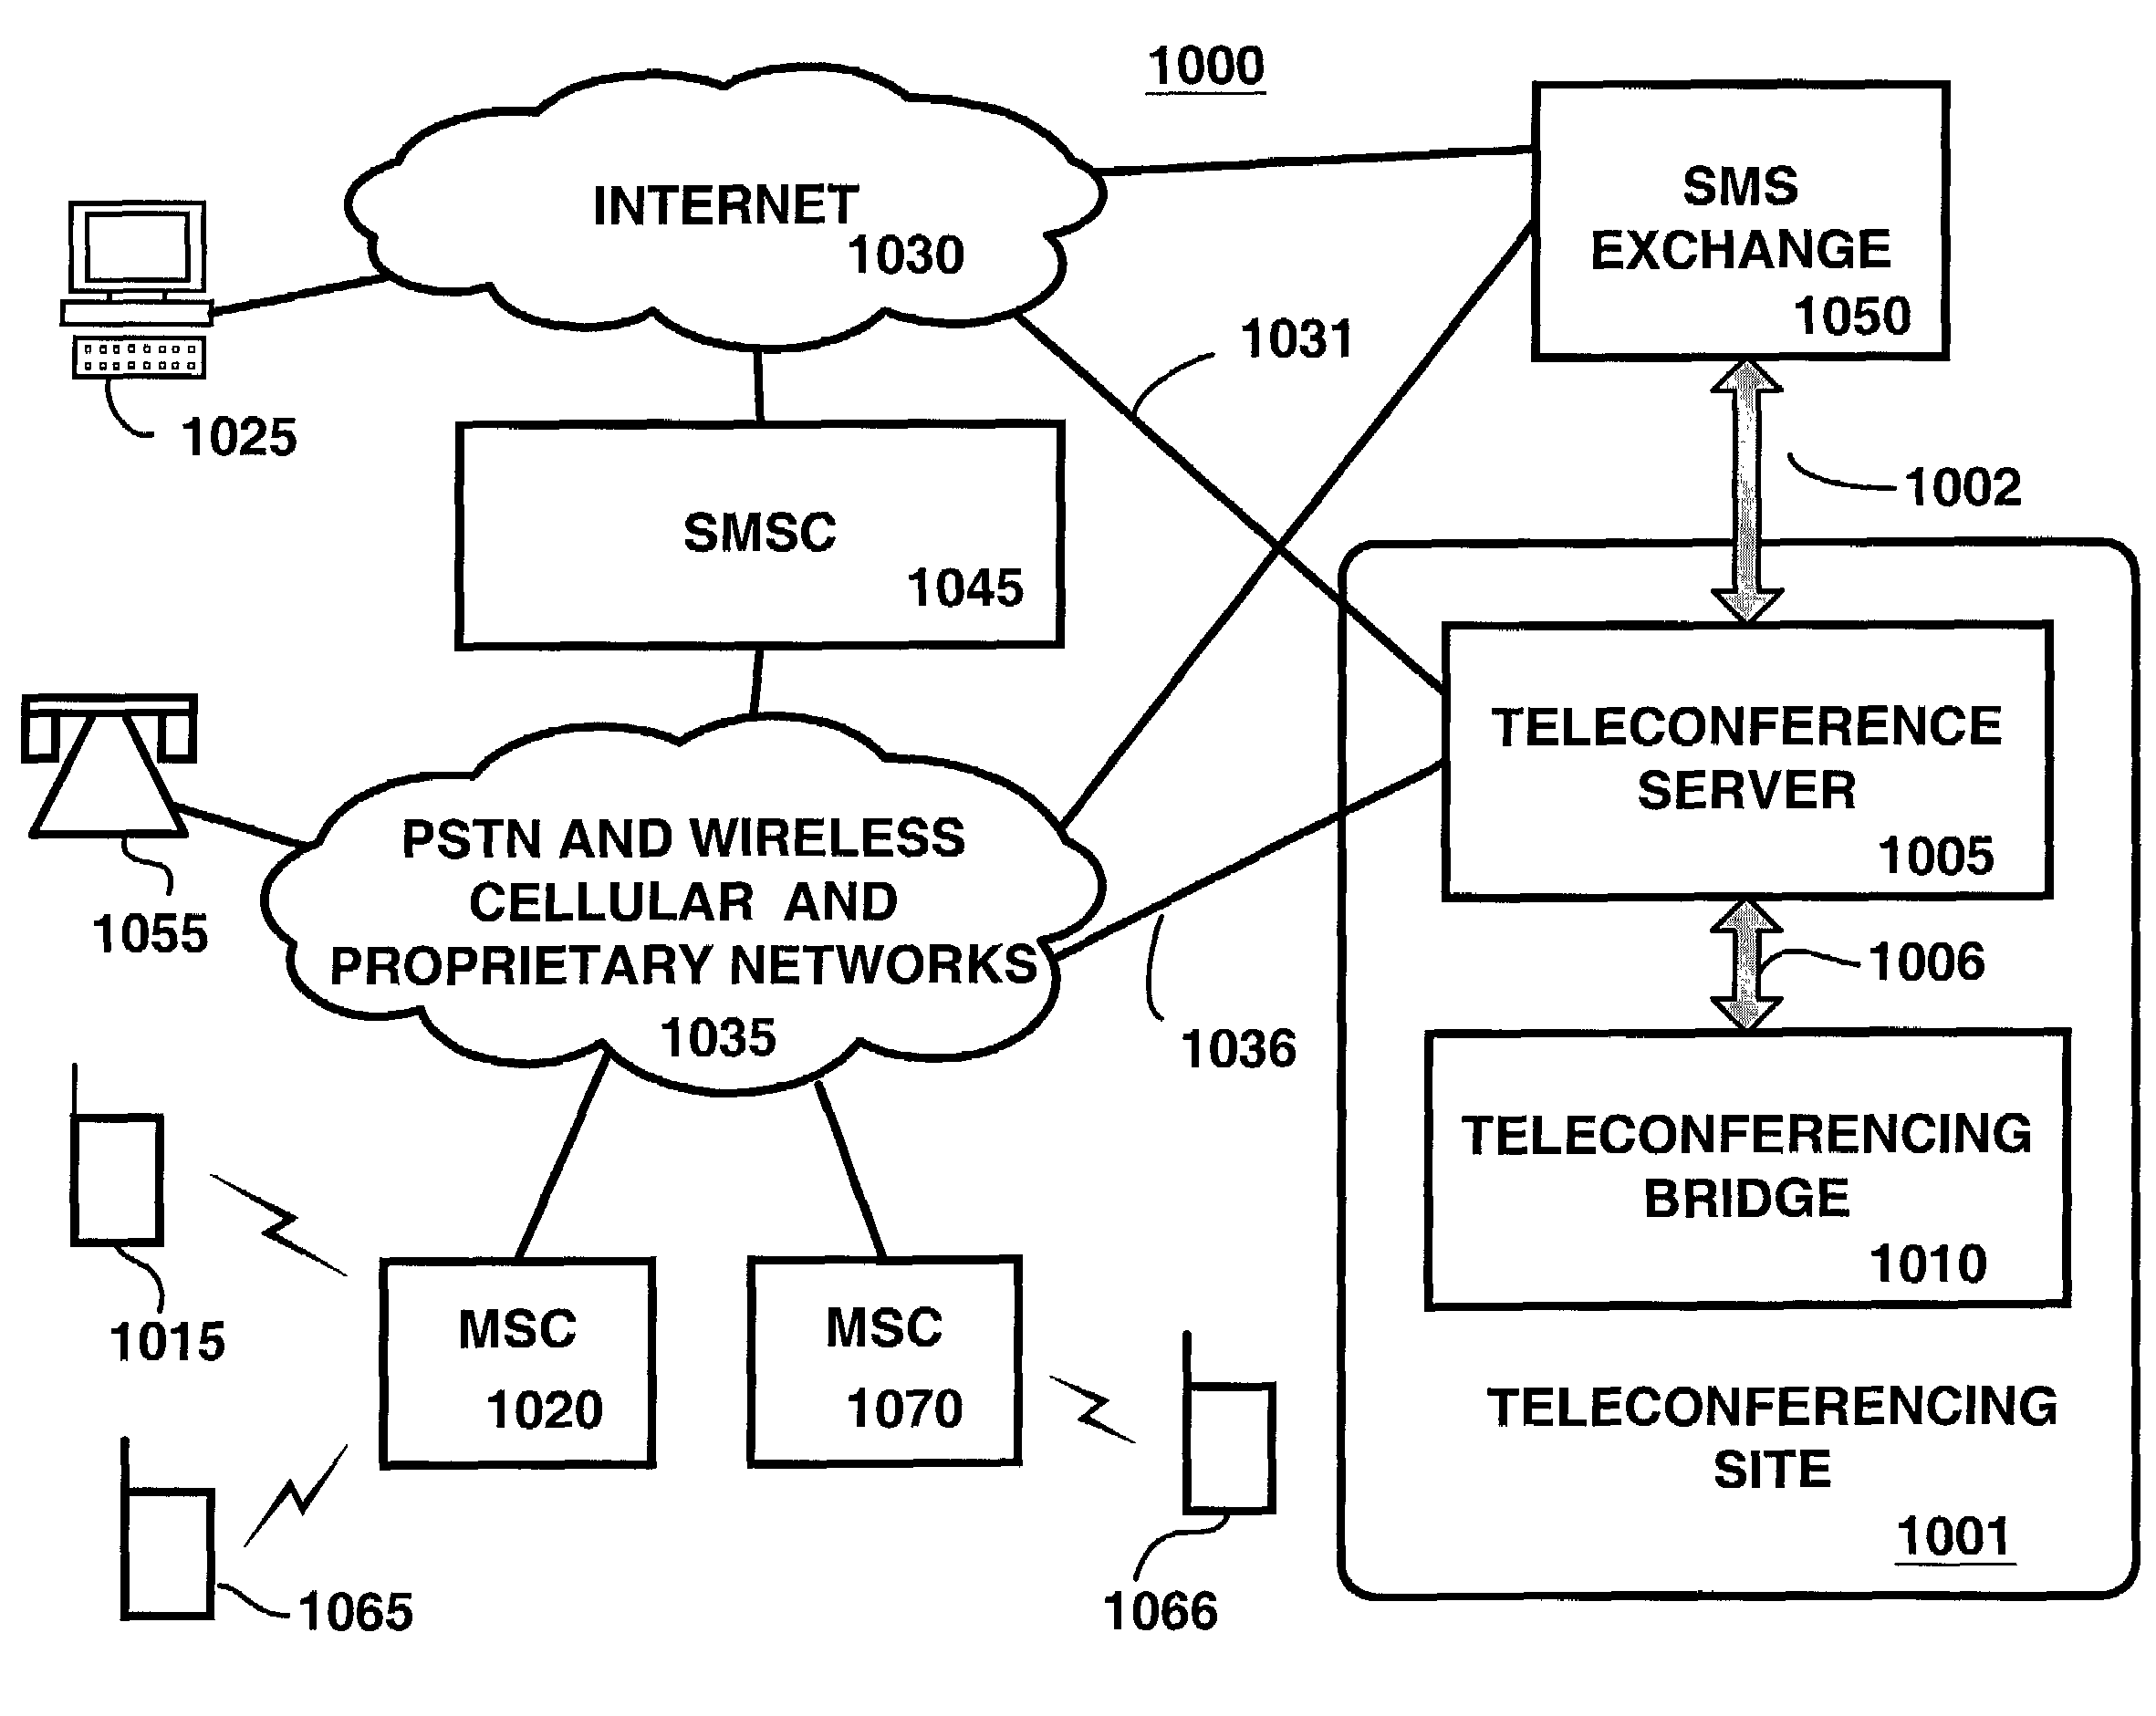 Method and system for short message service exchange and teleconferencing